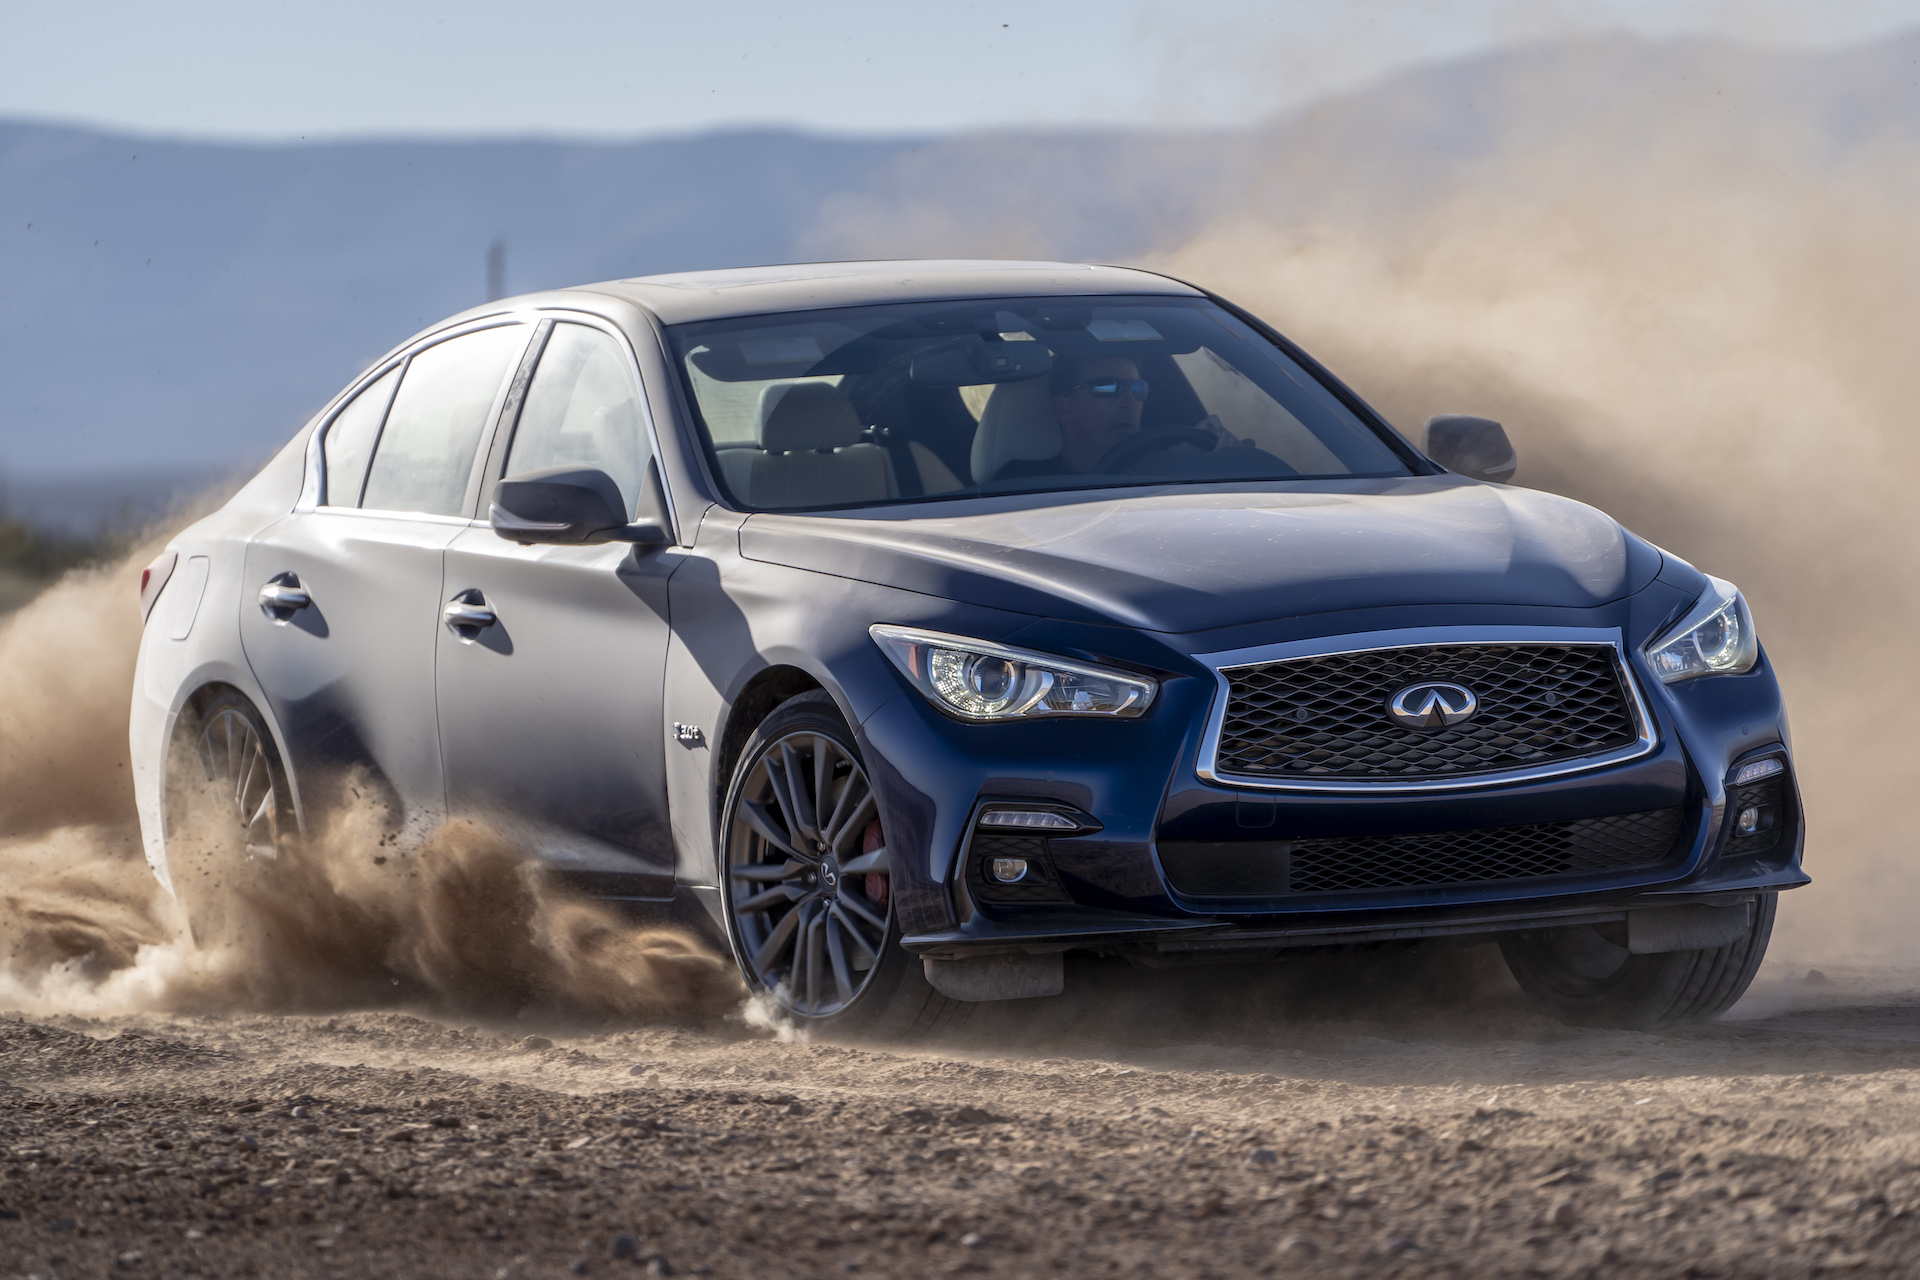 infiniti-s-reboot-moves-its-status-to-nissan-plus